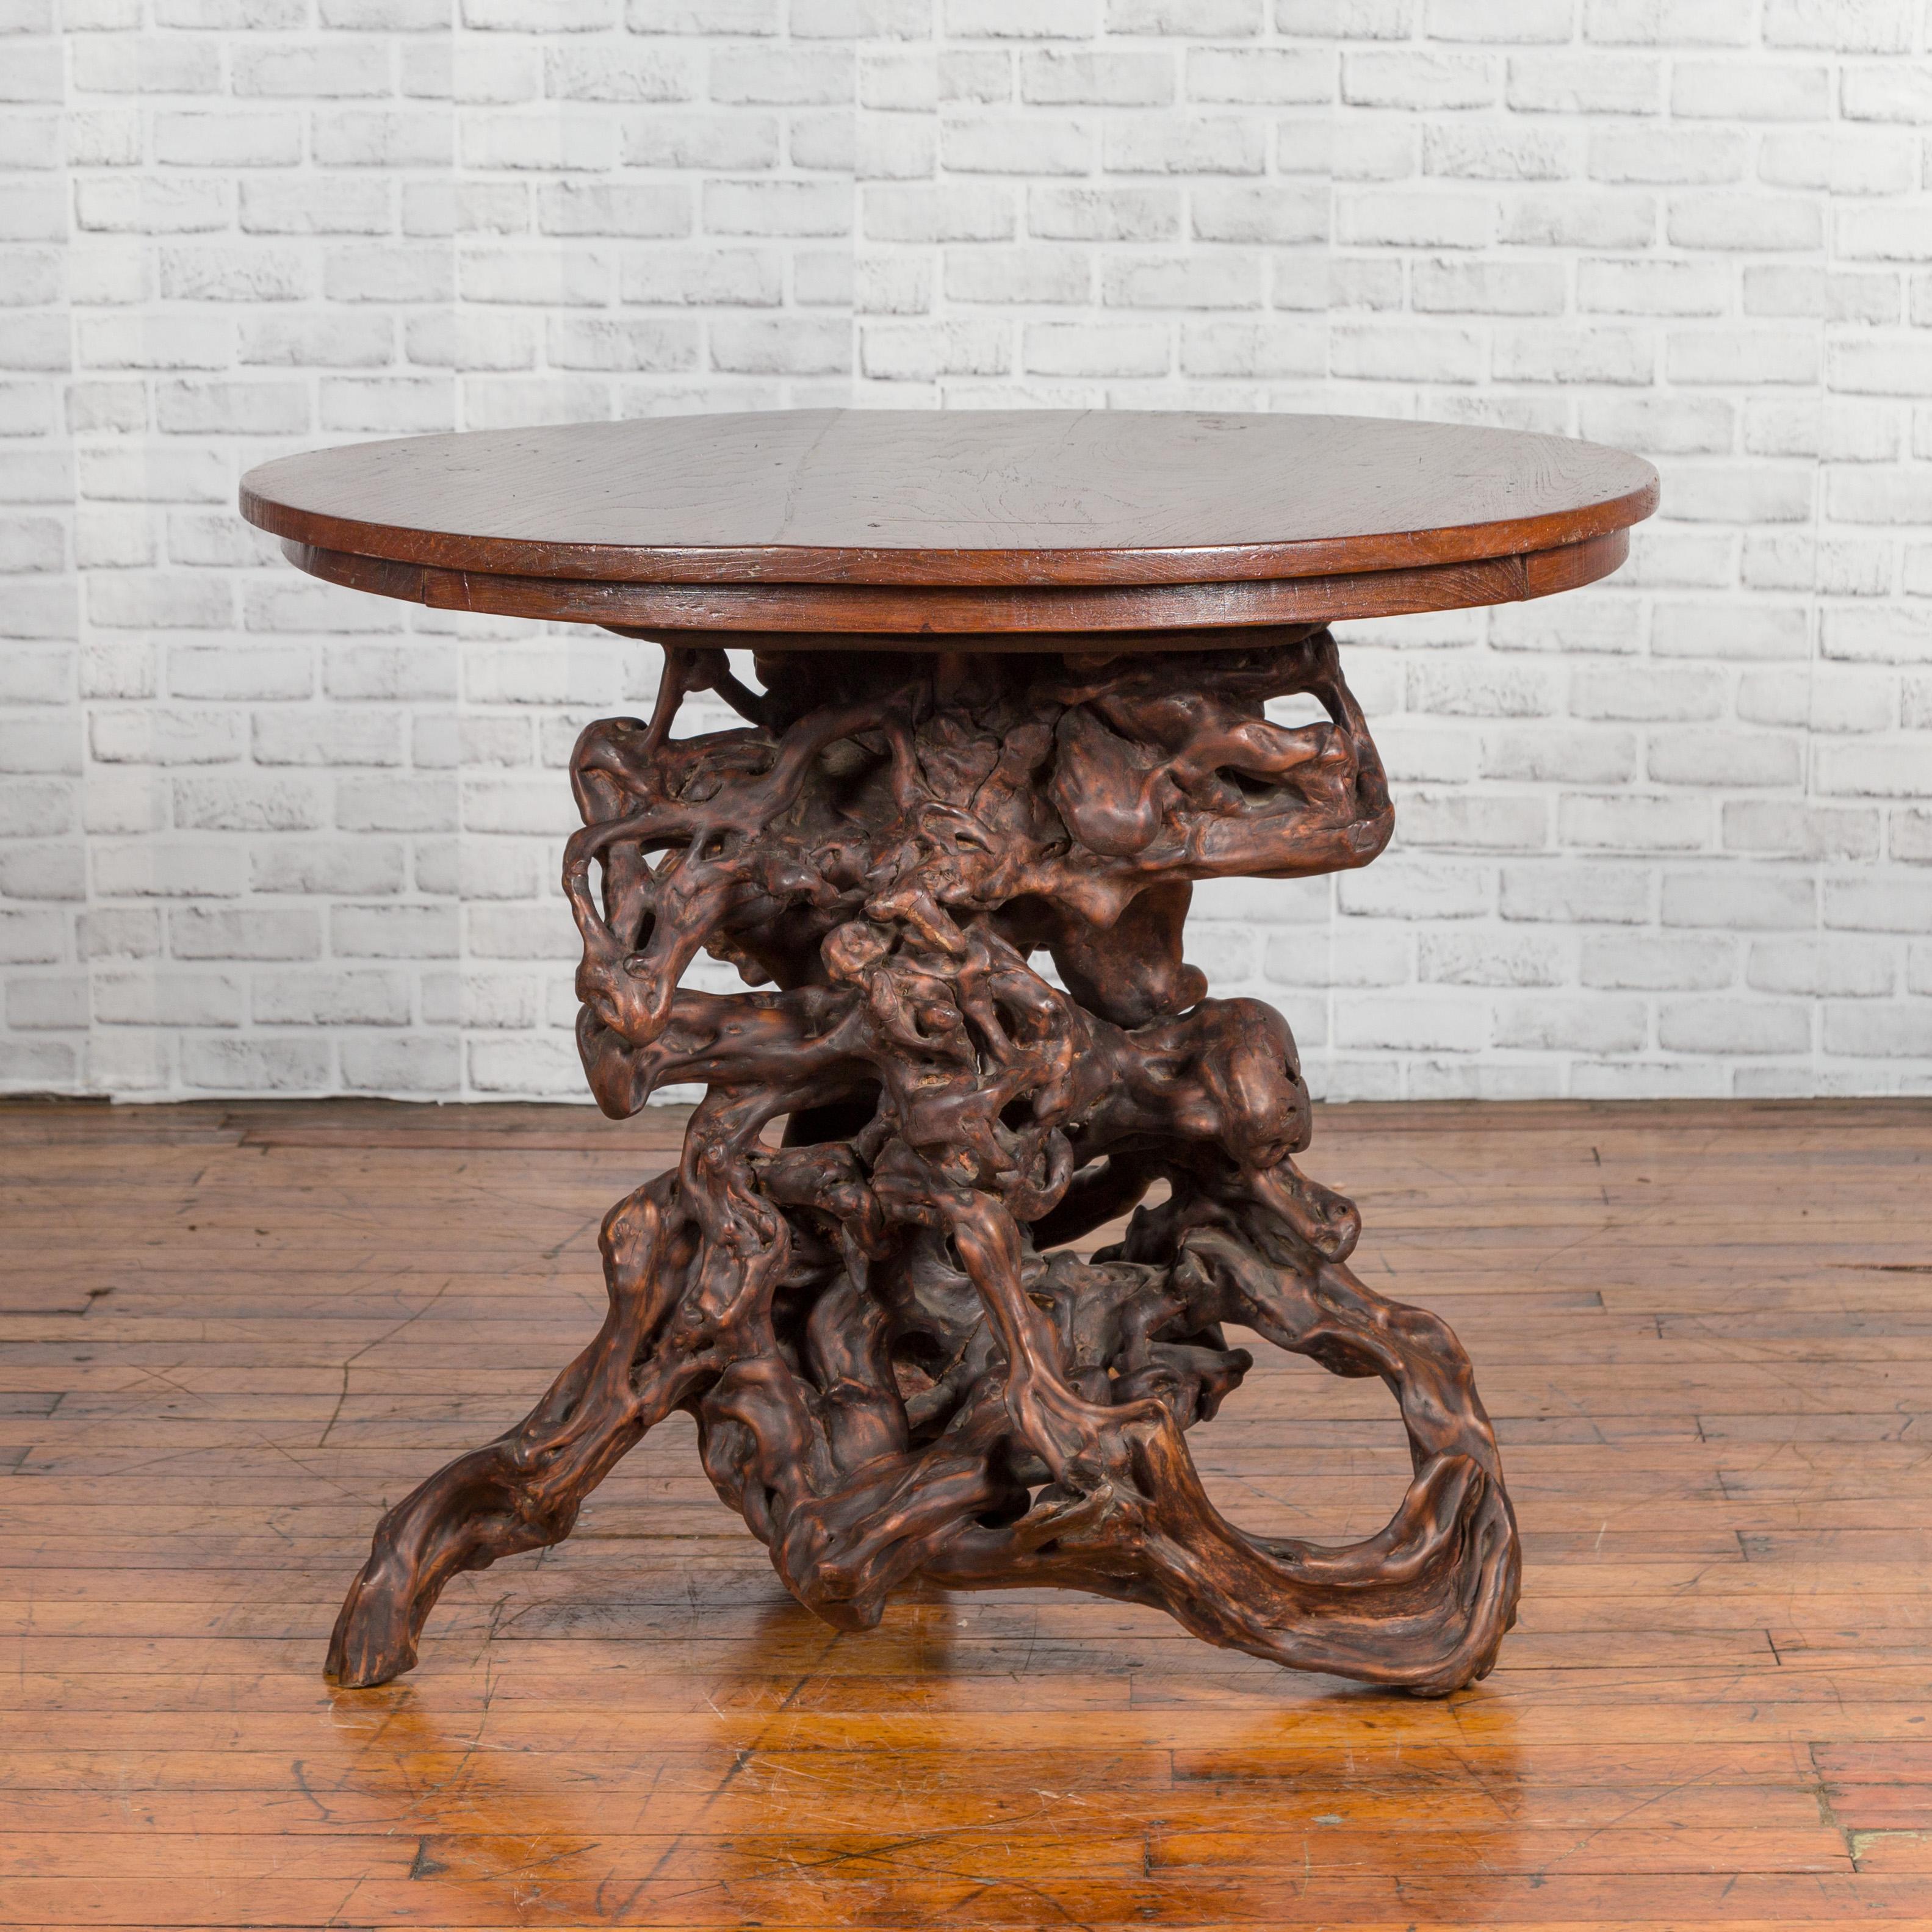 A small Chinese antique root table from the early 20th century, with circular top. Created in China, this center table features a circular planked top sitting above a striking root base, whose knotted quality creates a perfect contrast with the